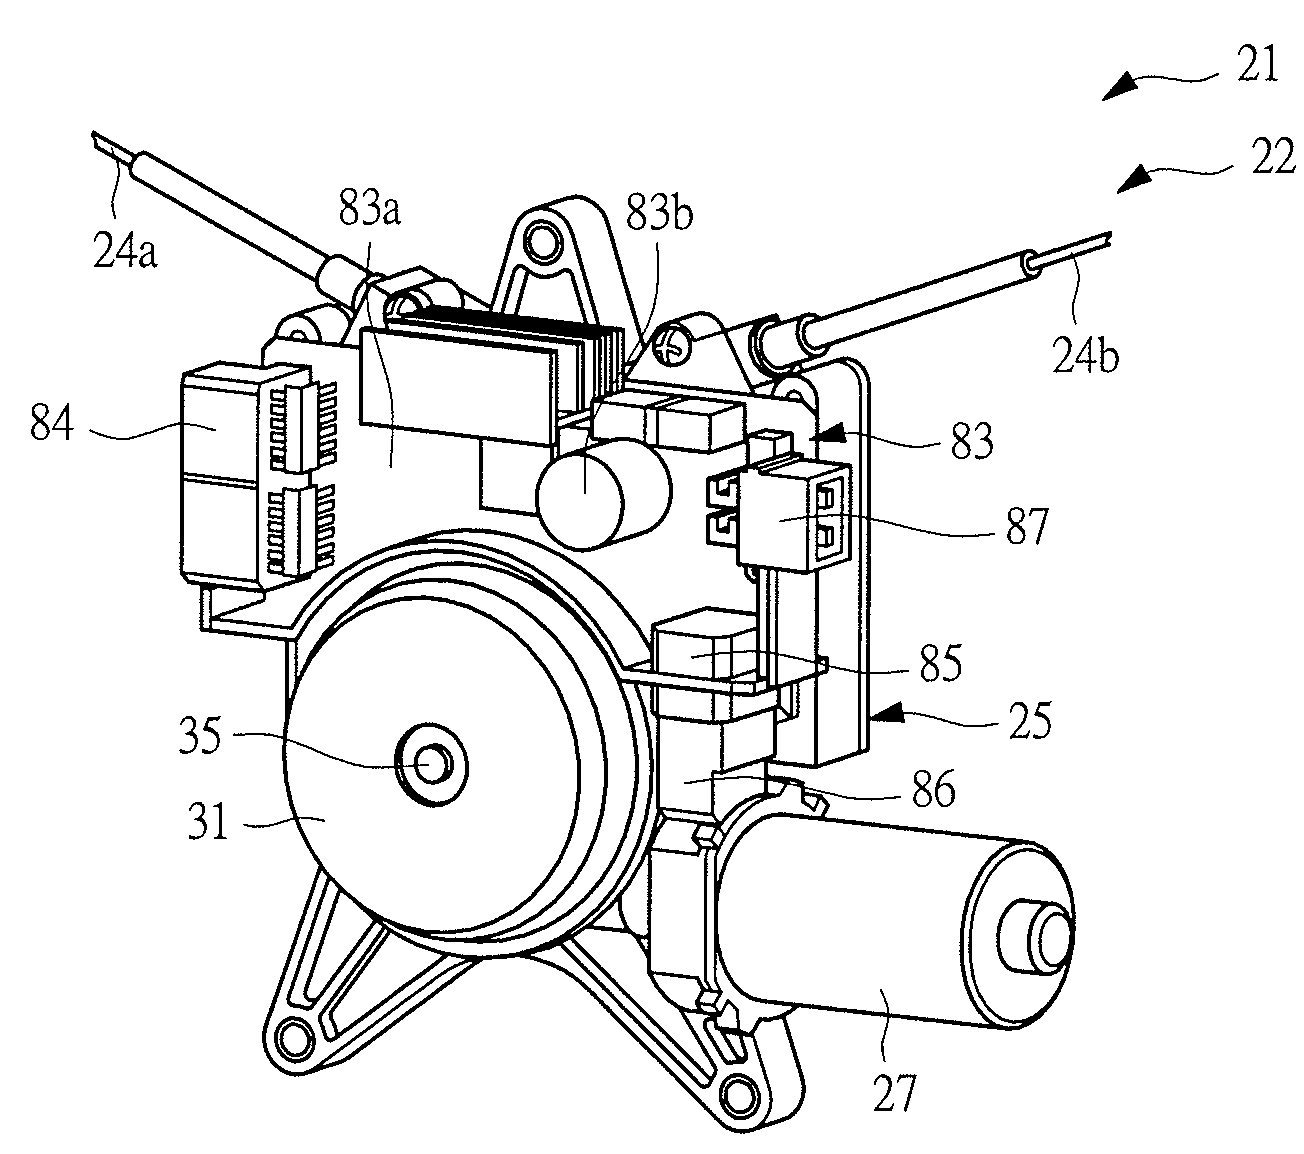 Automatic opening/closing apparatus for vehicle